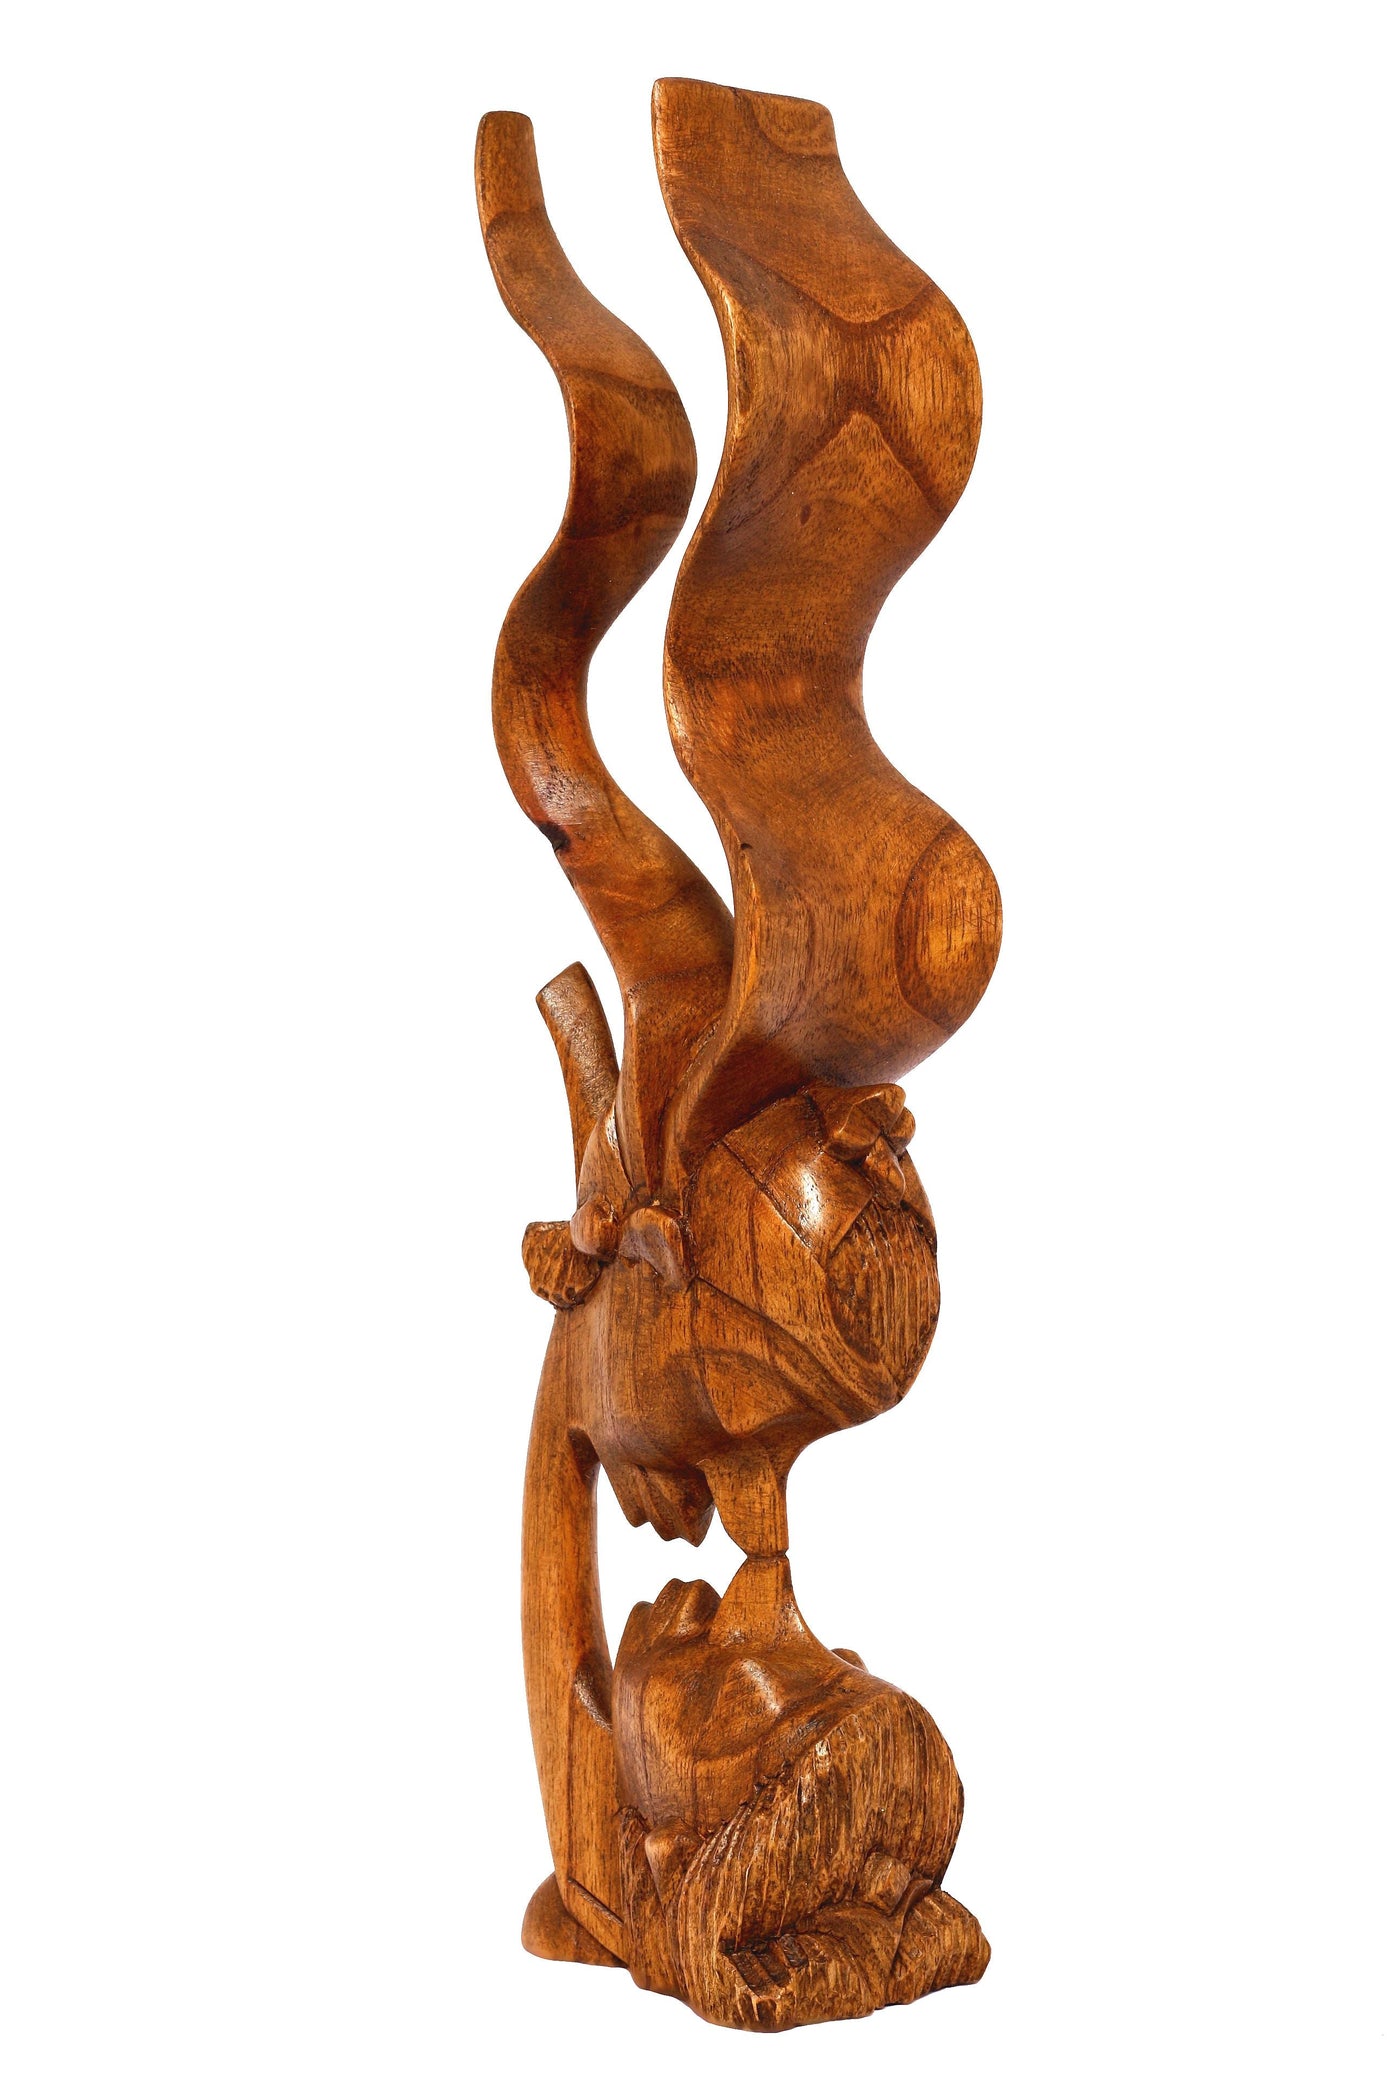 13" Wooden Handmade Abstract Sculpture Statue Handcrafted "The Kiss" Gift Art Decorative Home Decor Figurine Accent Decoration Artwork Hand Carved